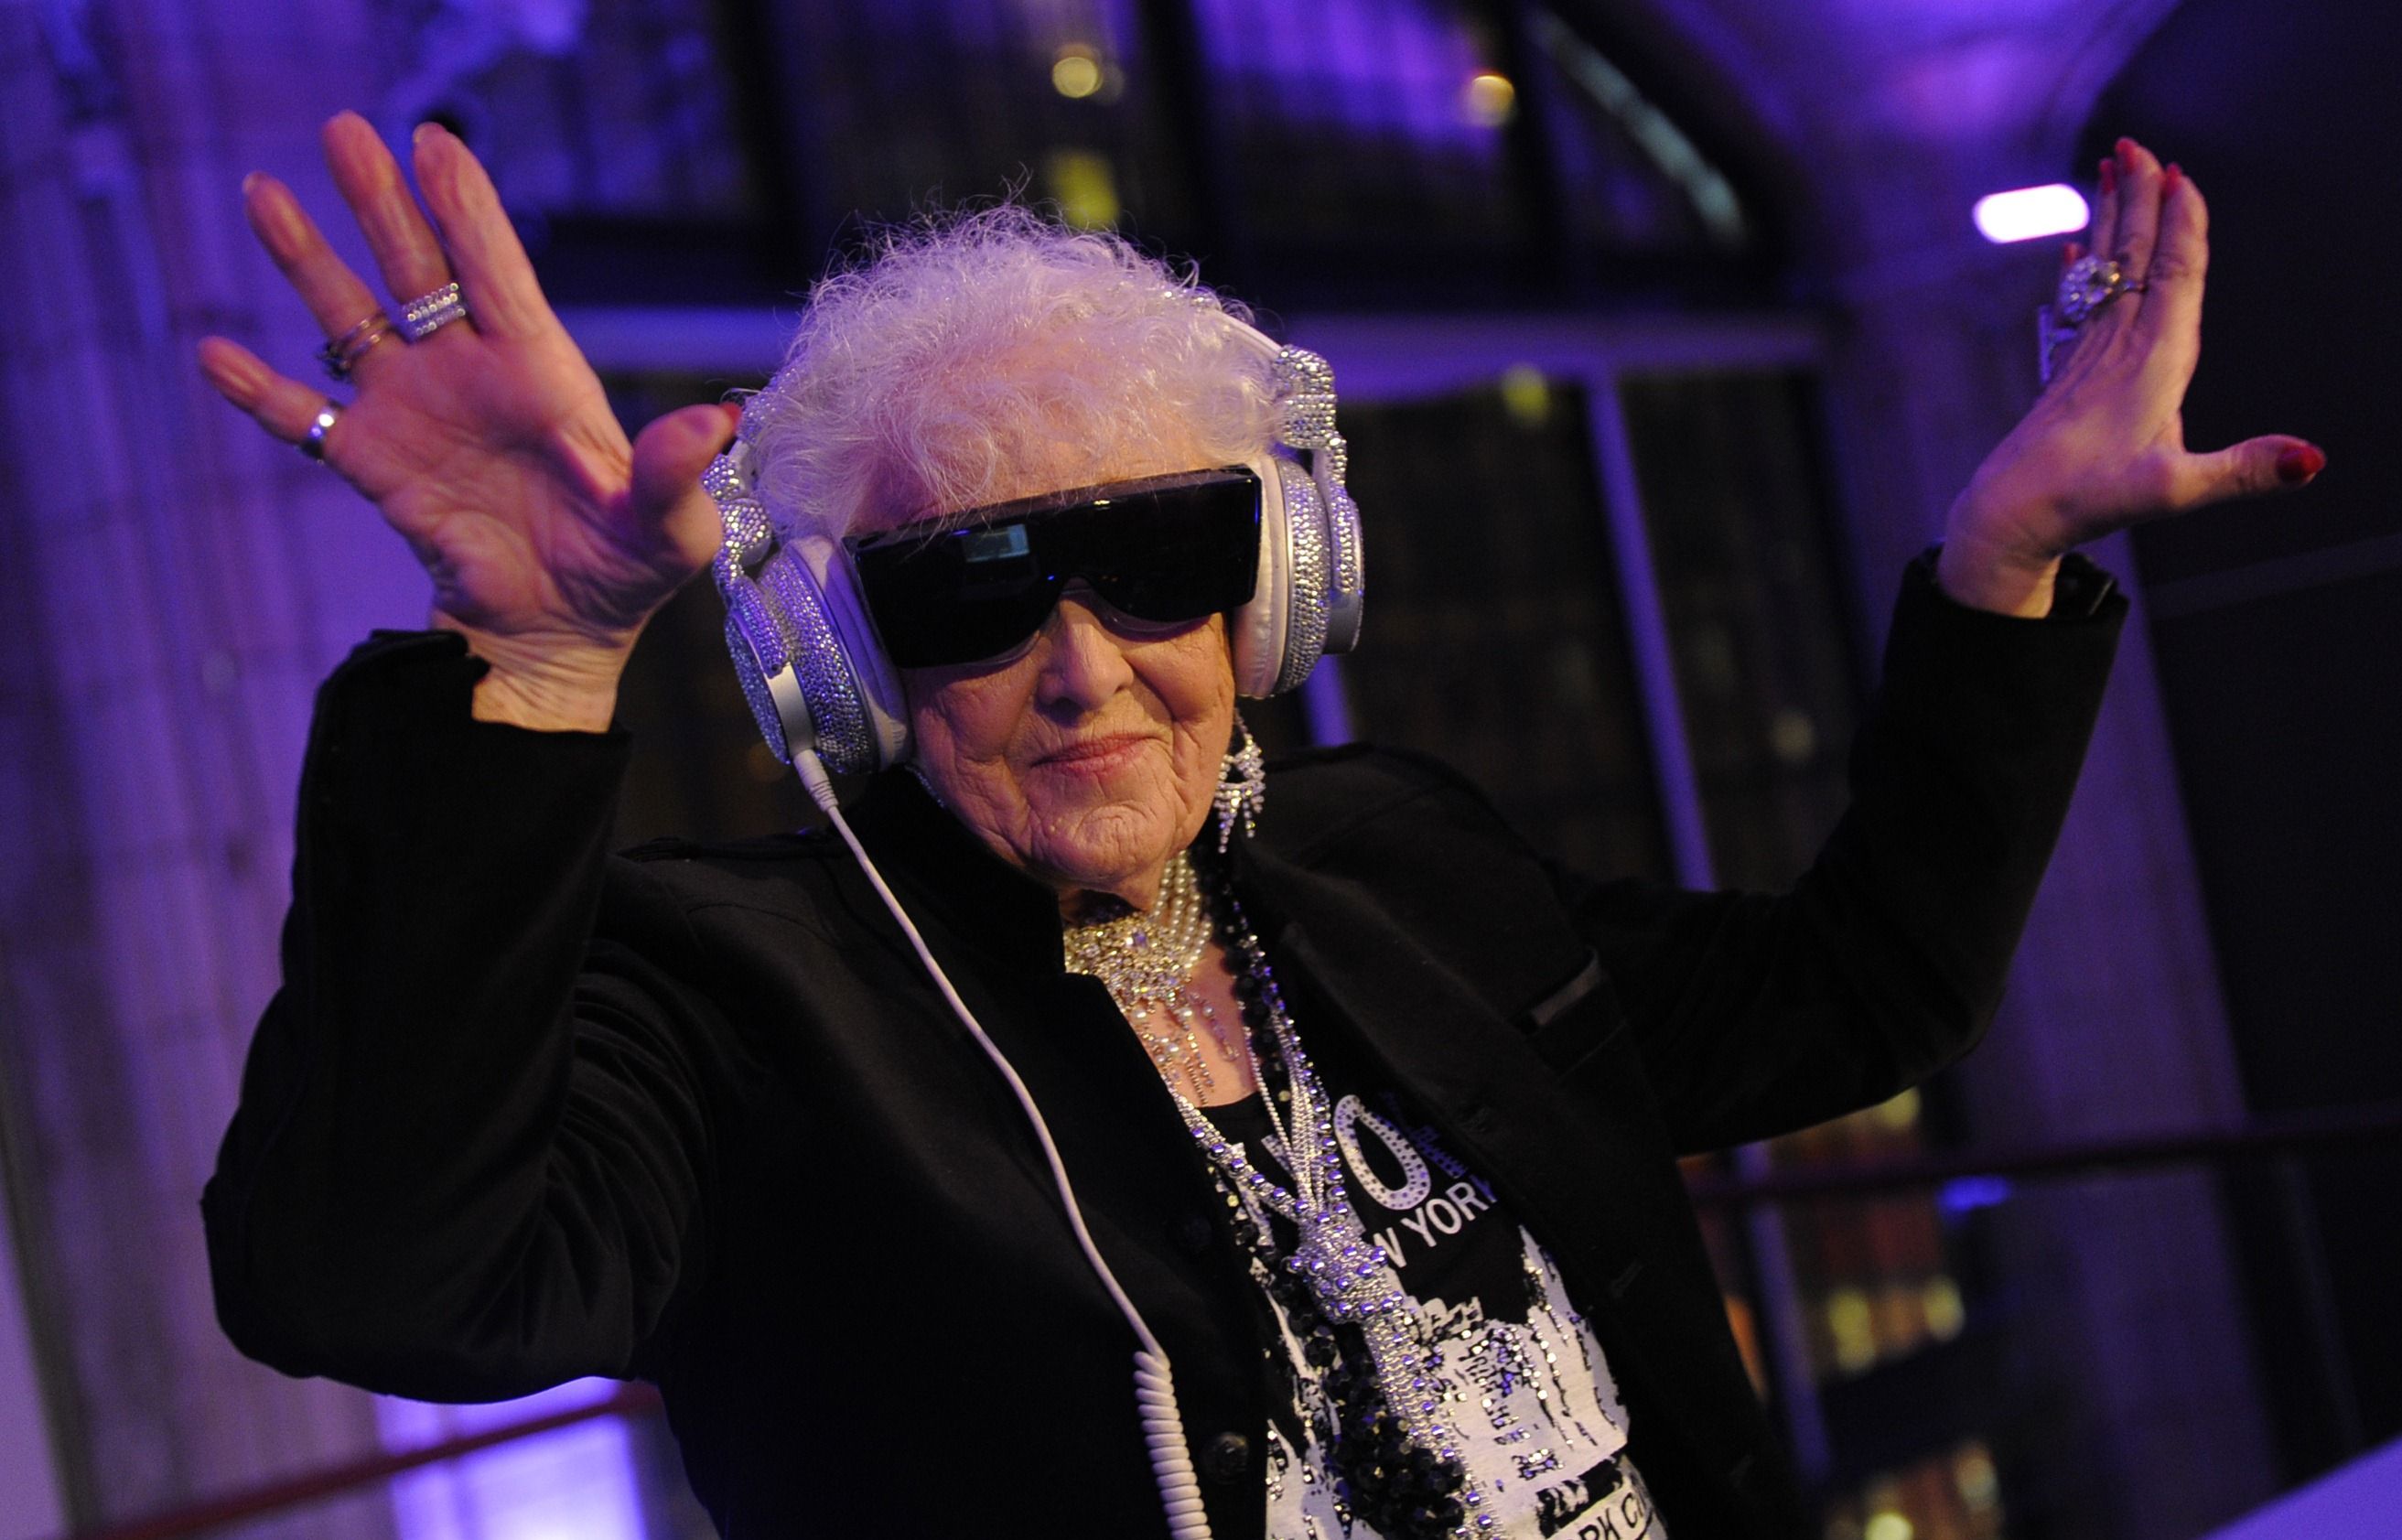 Ruth Flowers aka DJ Mamy Rock at the Carter Burden Center for the Aging's 31st Annual Dinner Dance and Awards Ceremony at Guastavino's on November 29, 2010. | Source: Getty Images